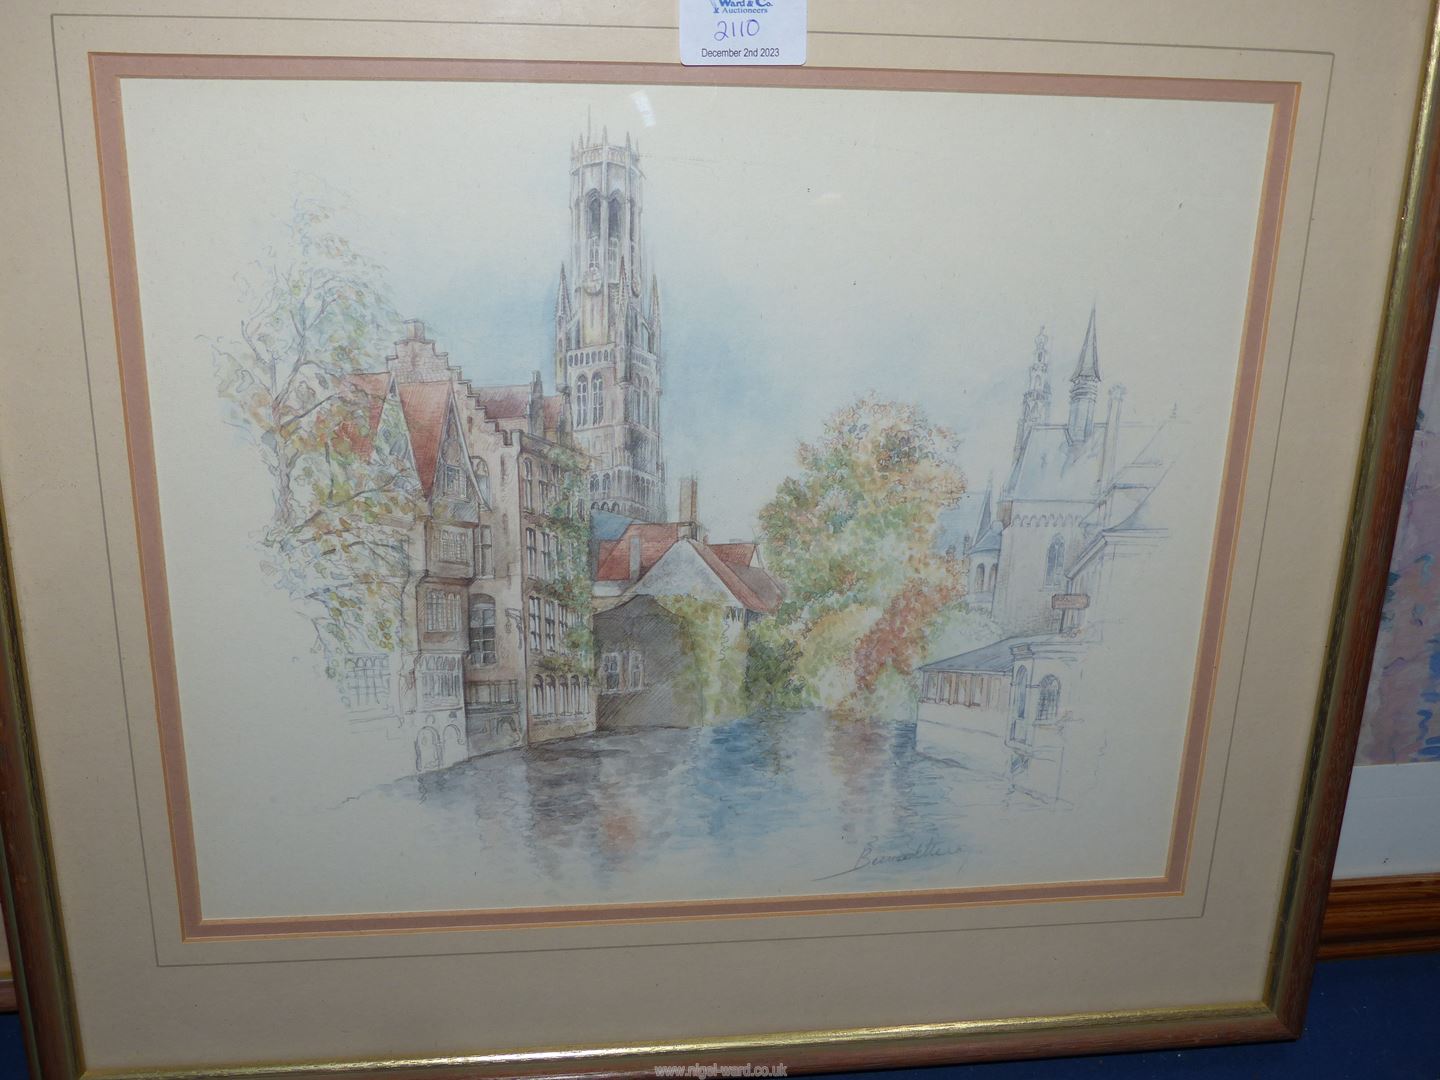 Three framed Prints "The Canal" by Paul Mathieu "Bruges City" by Bernadette Voz and "Burg - Image 2 of 4